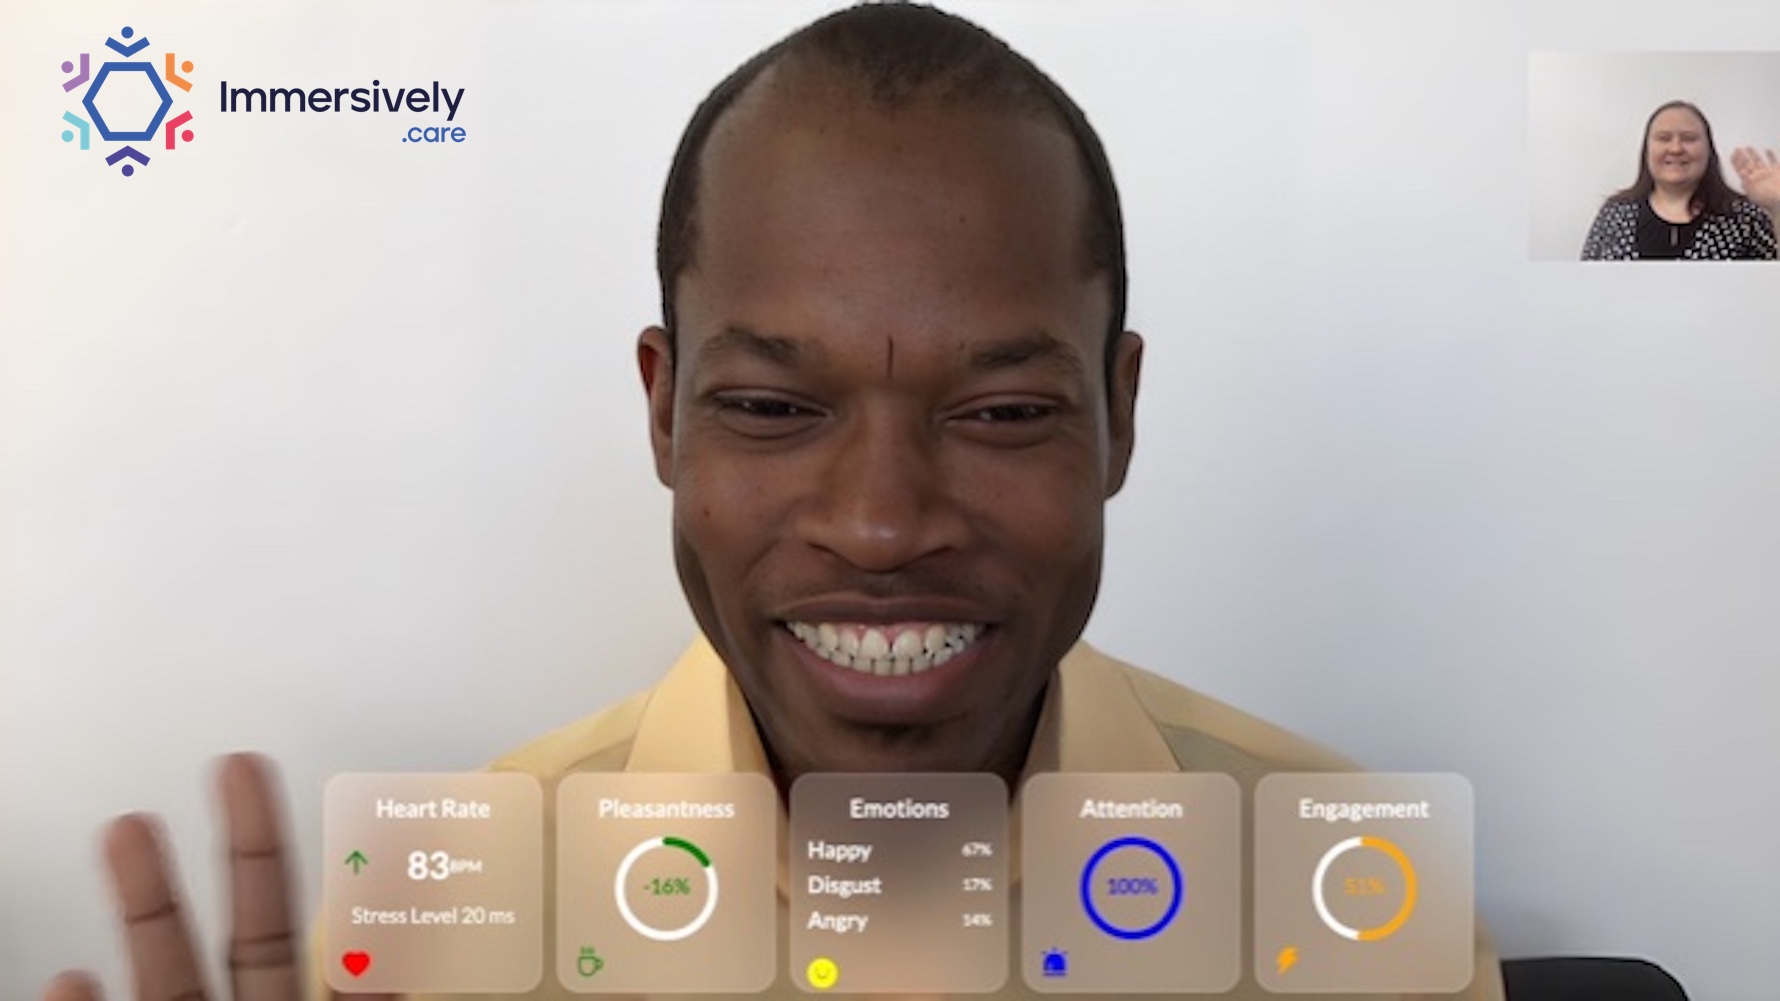 Read emotions and attention of participants during a video call using the camera and a web browser only. We bring behavioral analysis to virtual meetings and we enable safe conversations that build connection, understanding, and impact.